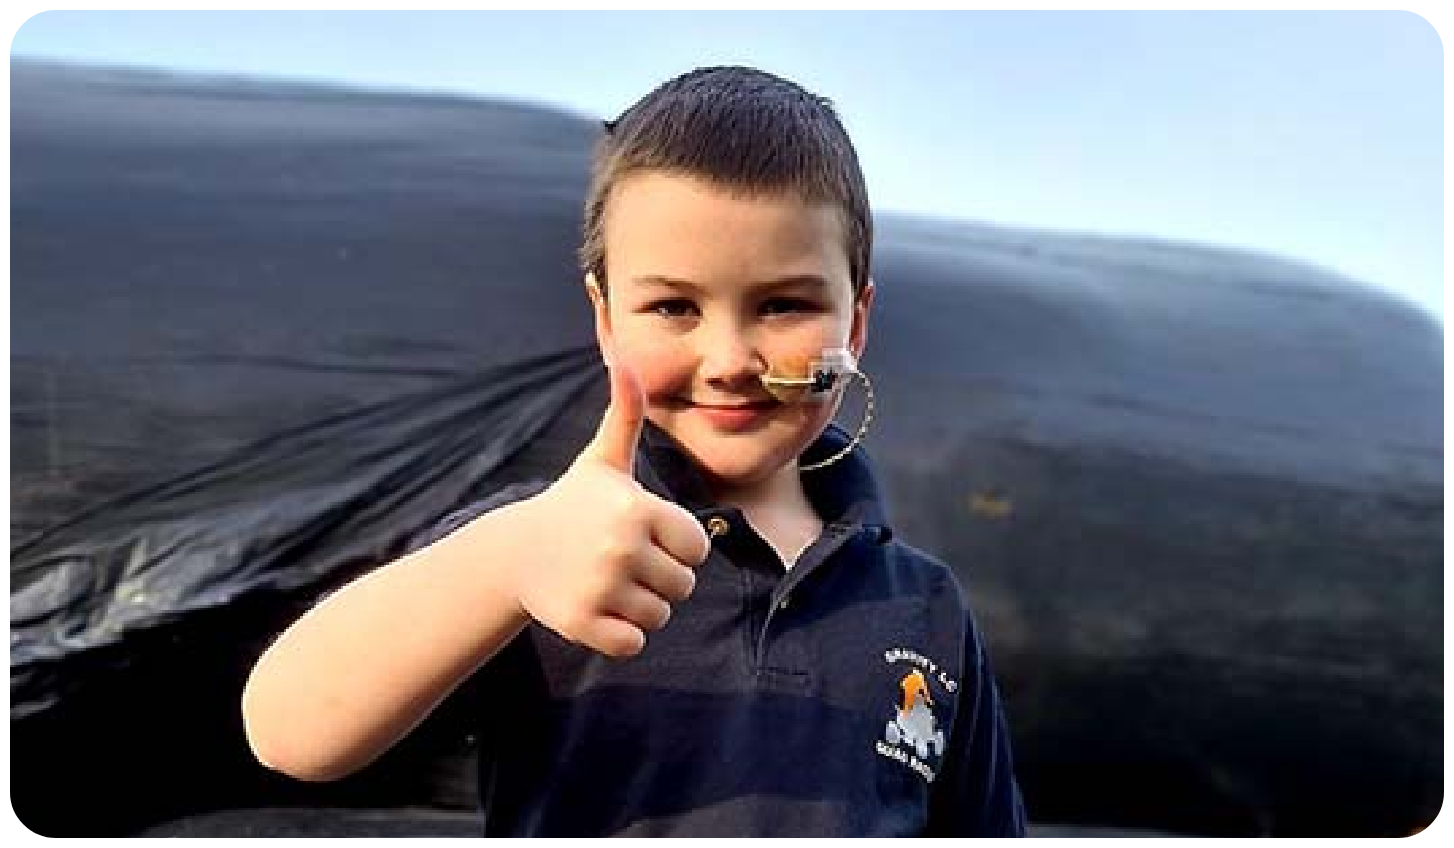 young boy with thumbs up to camera